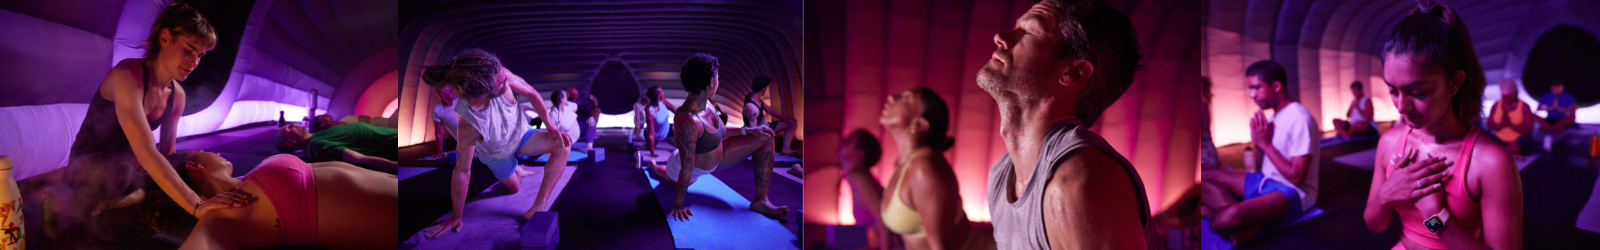 A series of hotpod yoga photos showing people doing yoga in the purple light of the pod